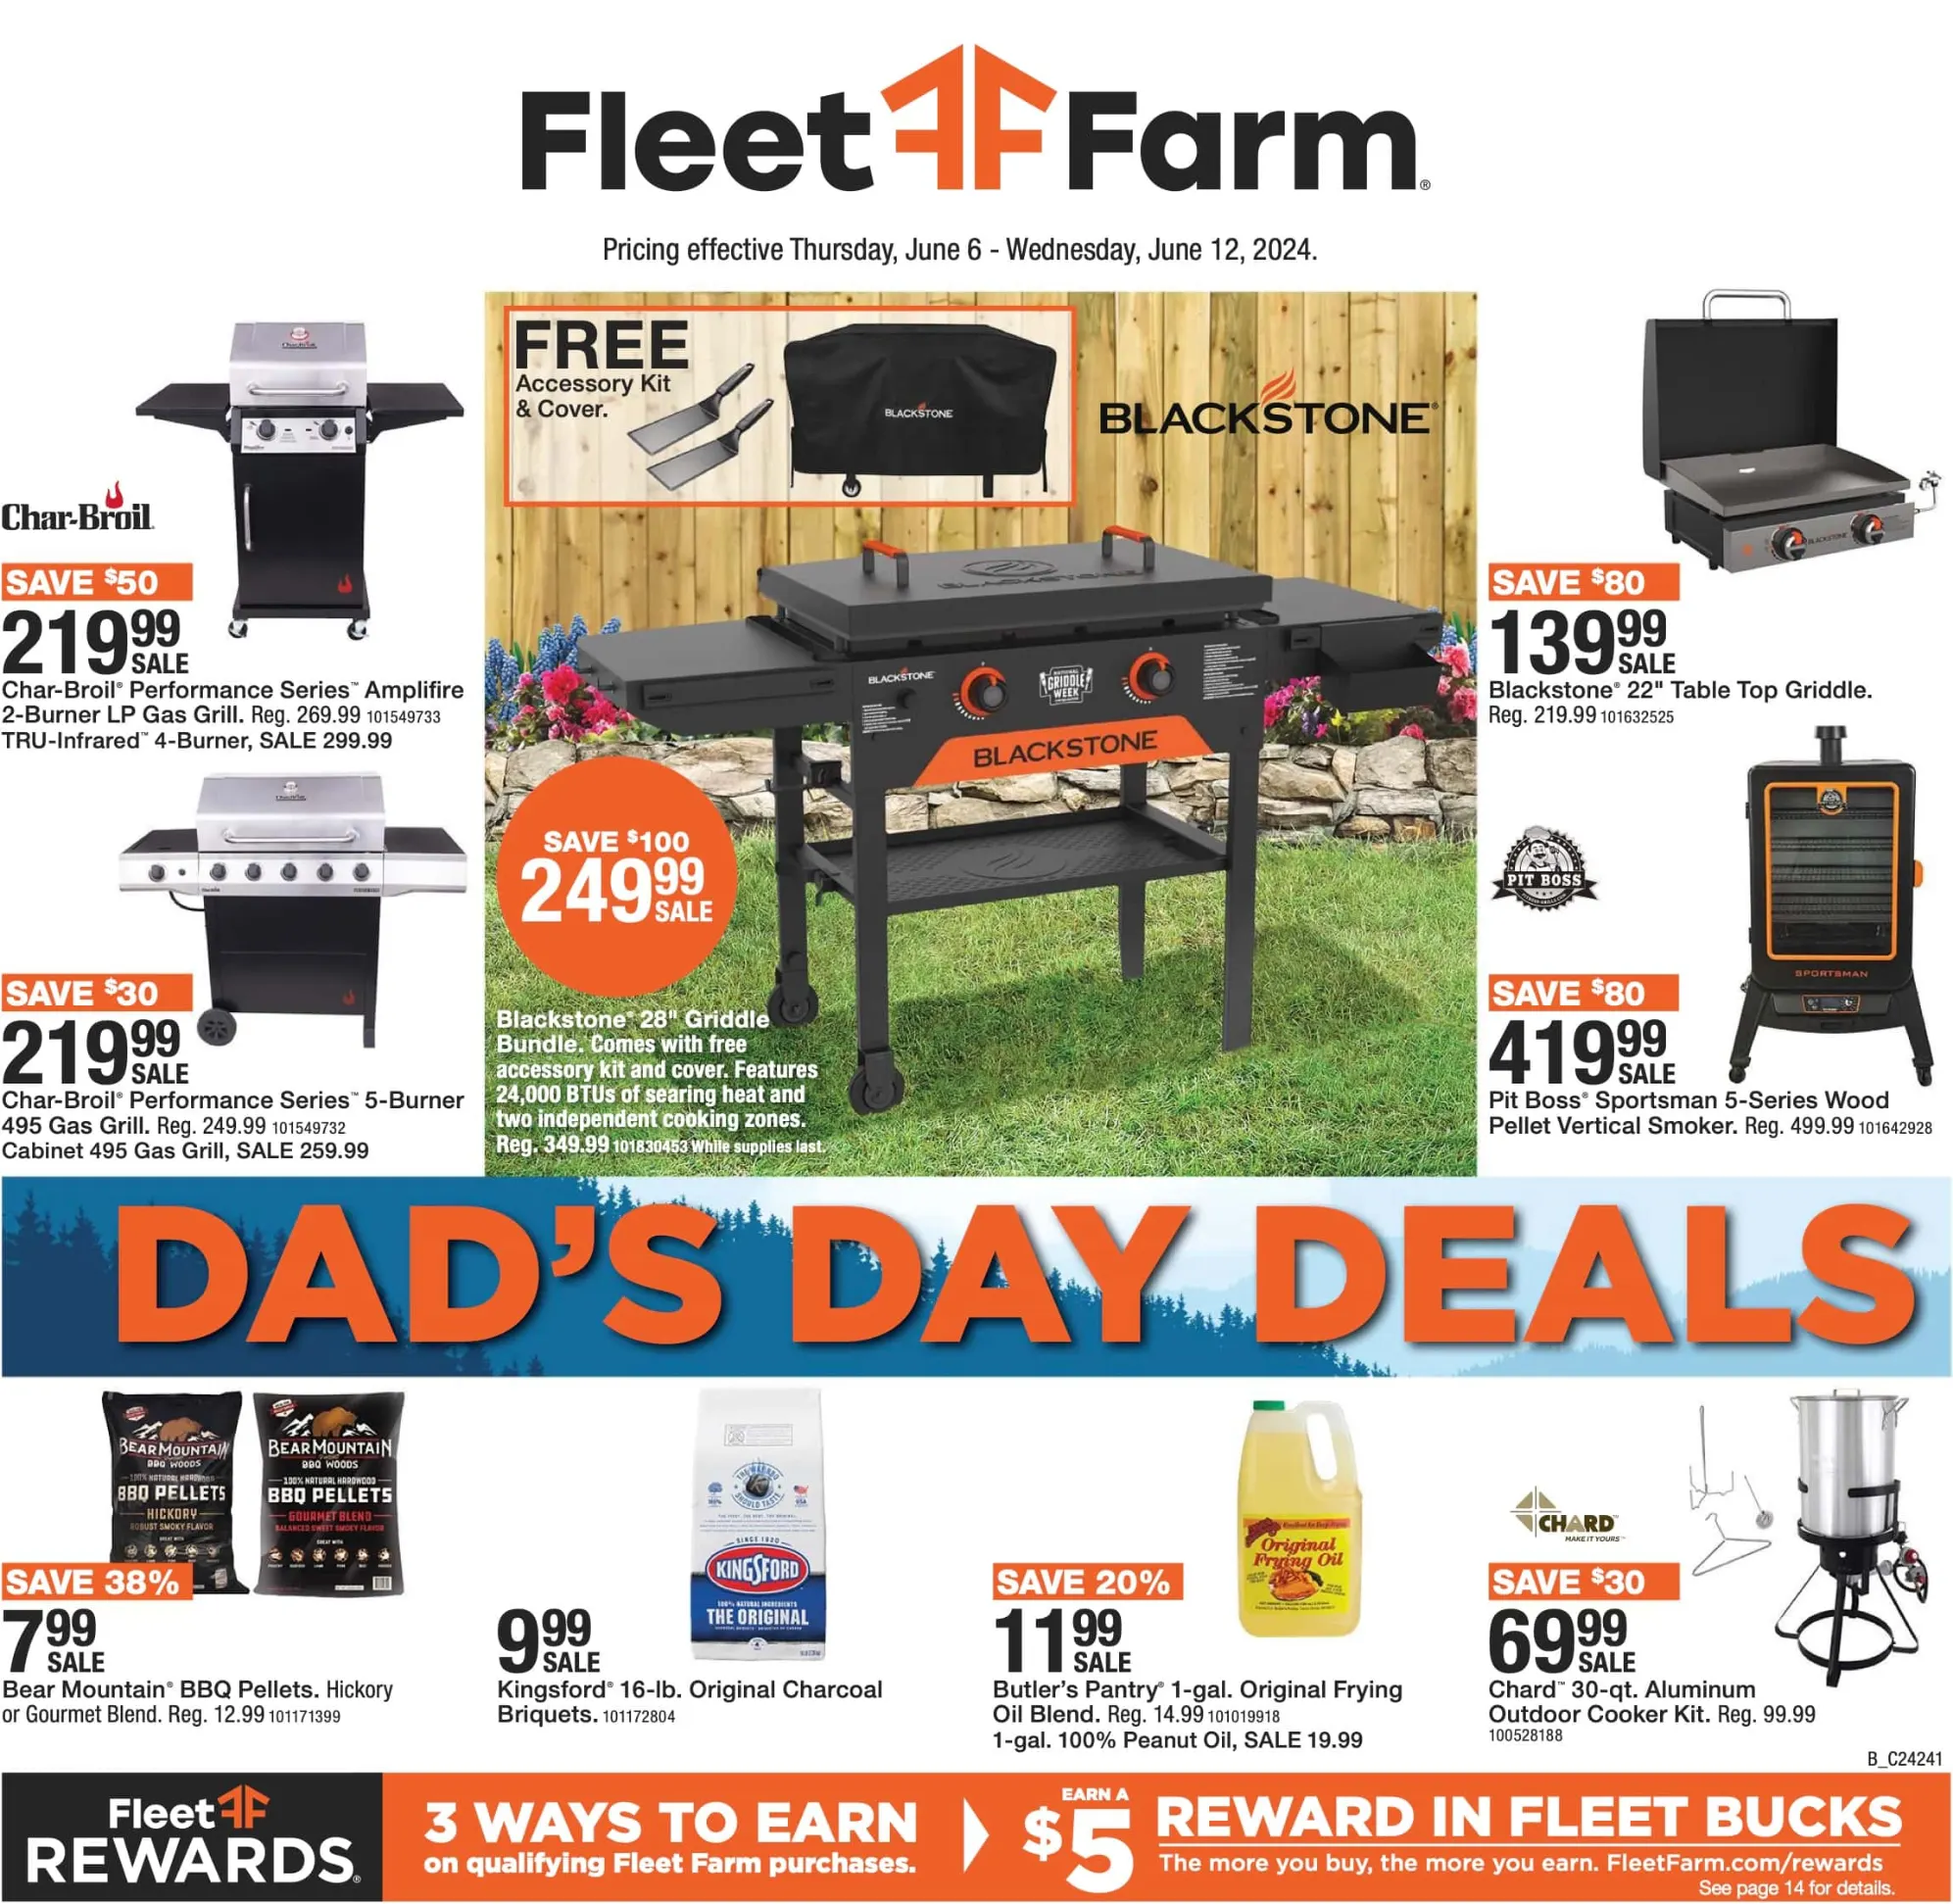 Fleet Farm July 2024 Weekly Sales, Deals, Discounts and Digital Coupons.